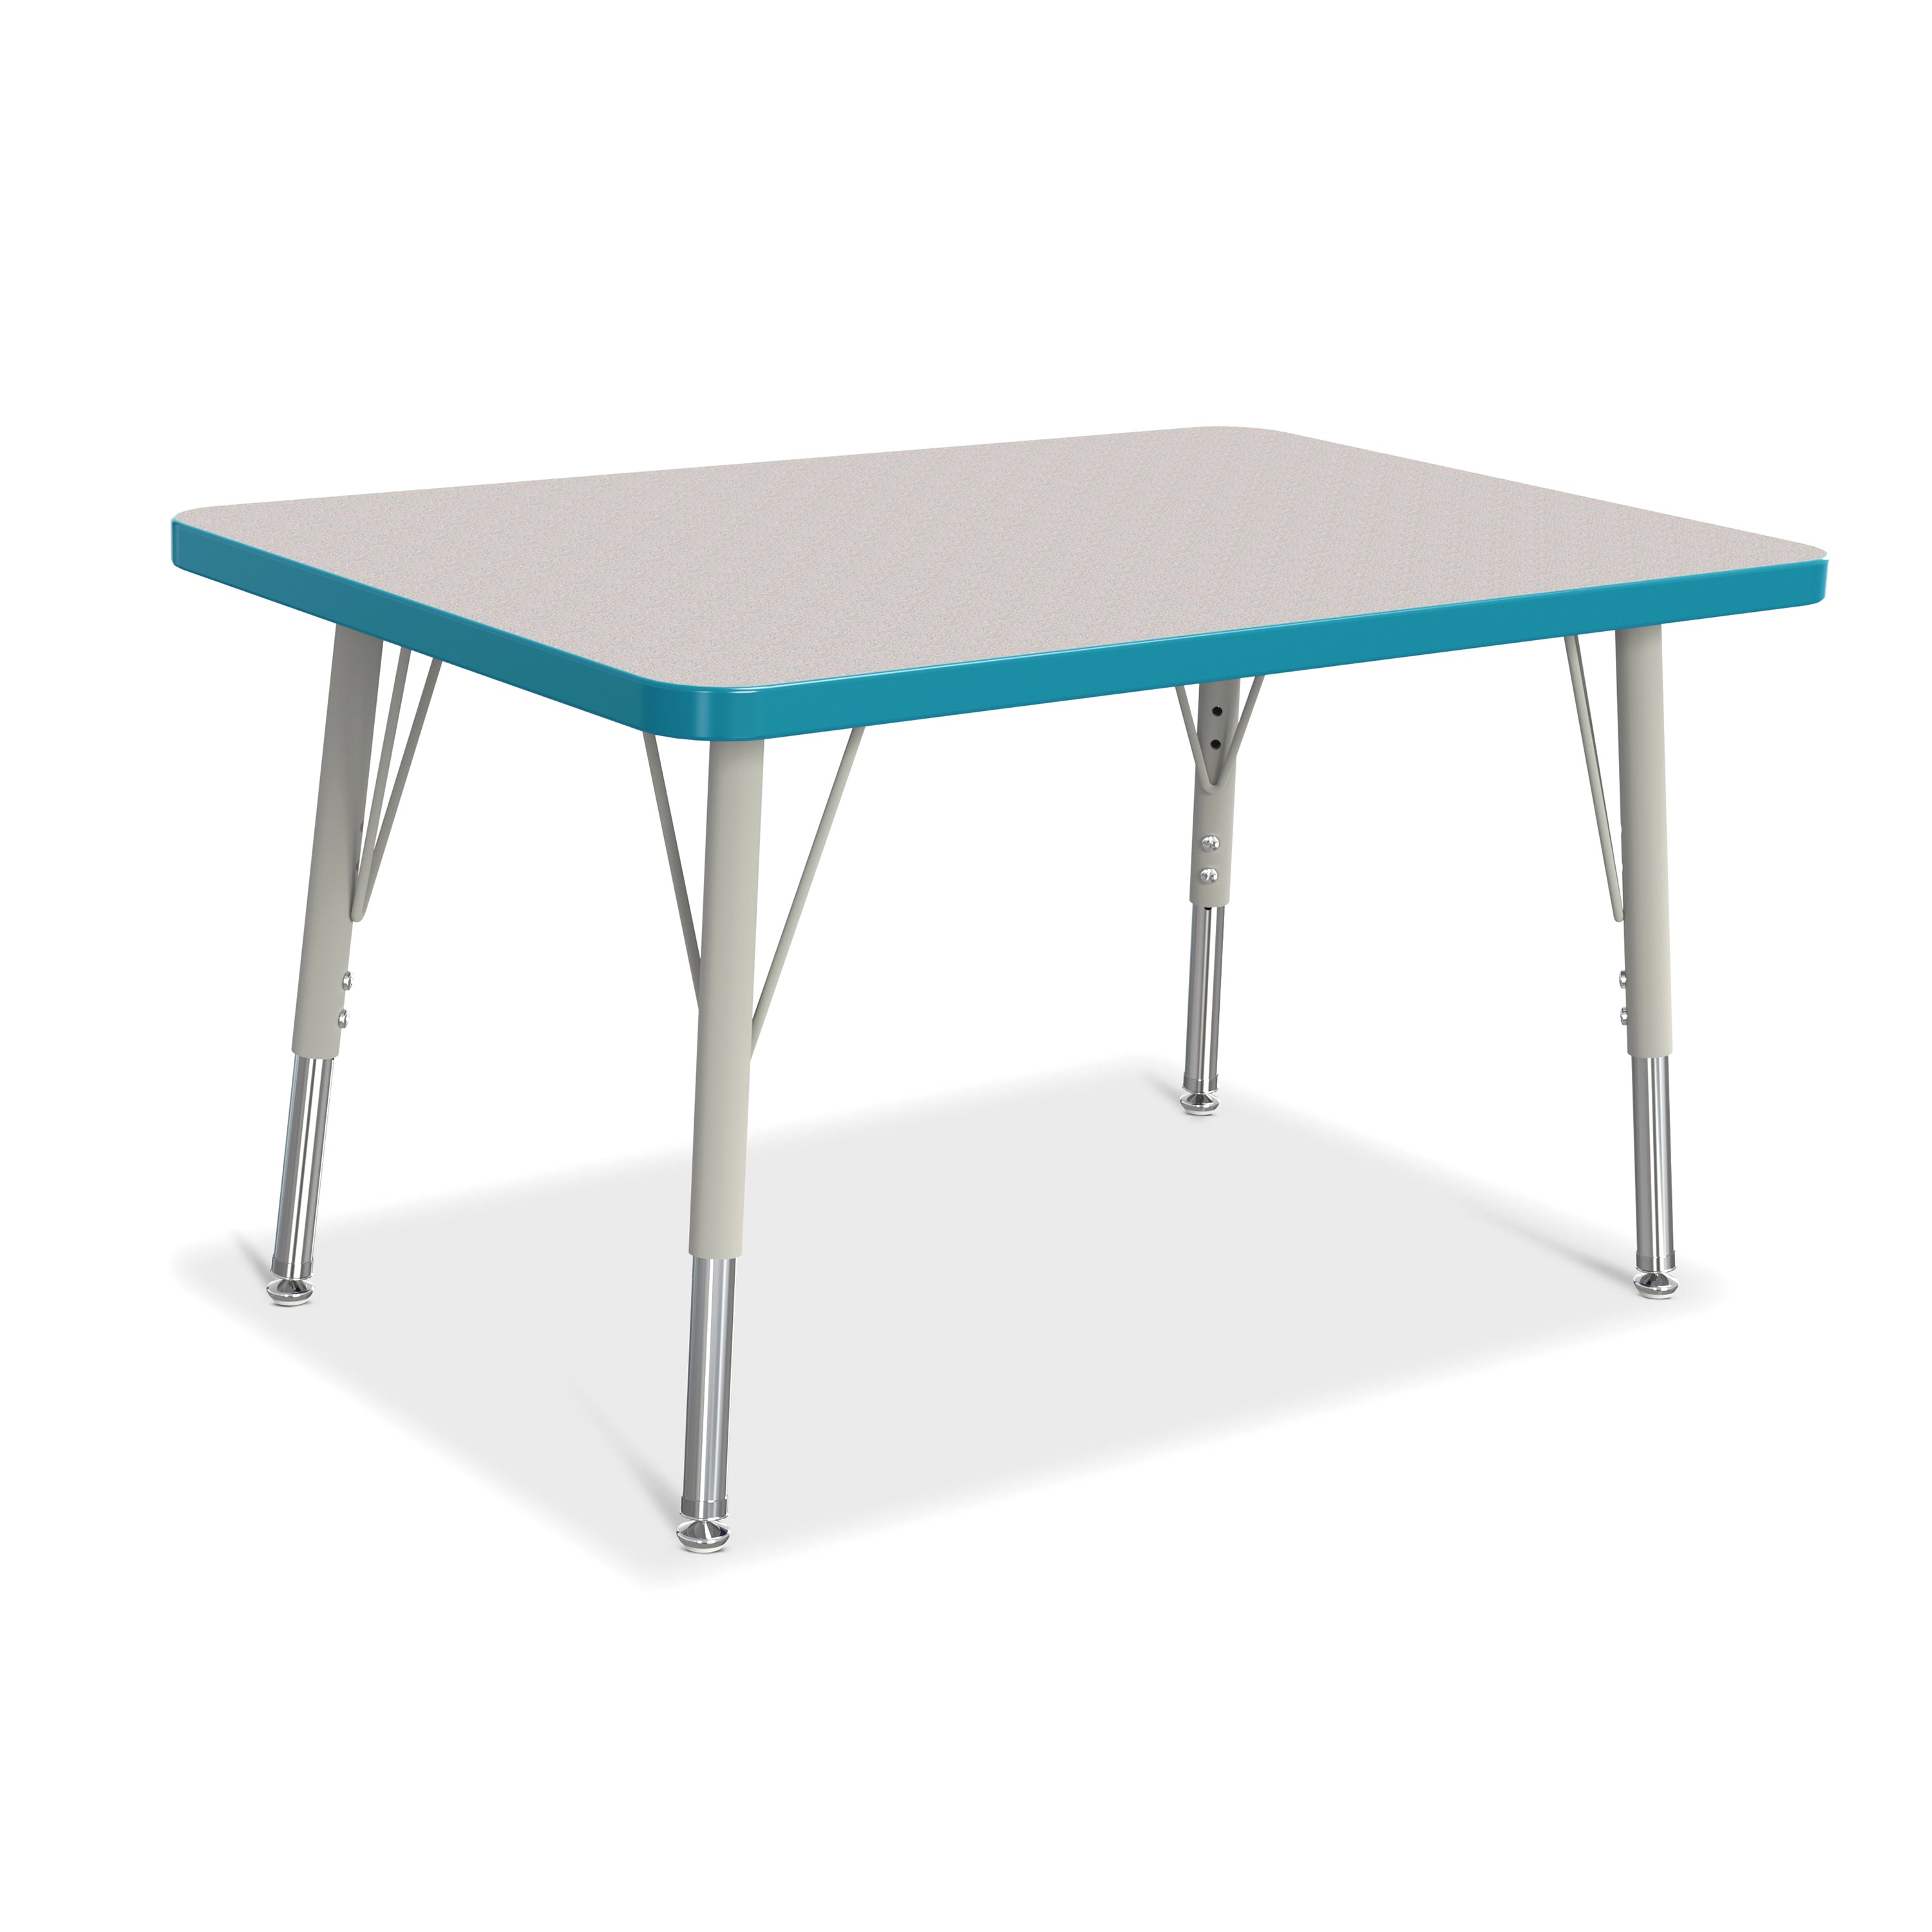 6478JCE005, Berries Rectangle Activity Table - 24" X 36", E-height - Freckled Gray/Teal/Gray